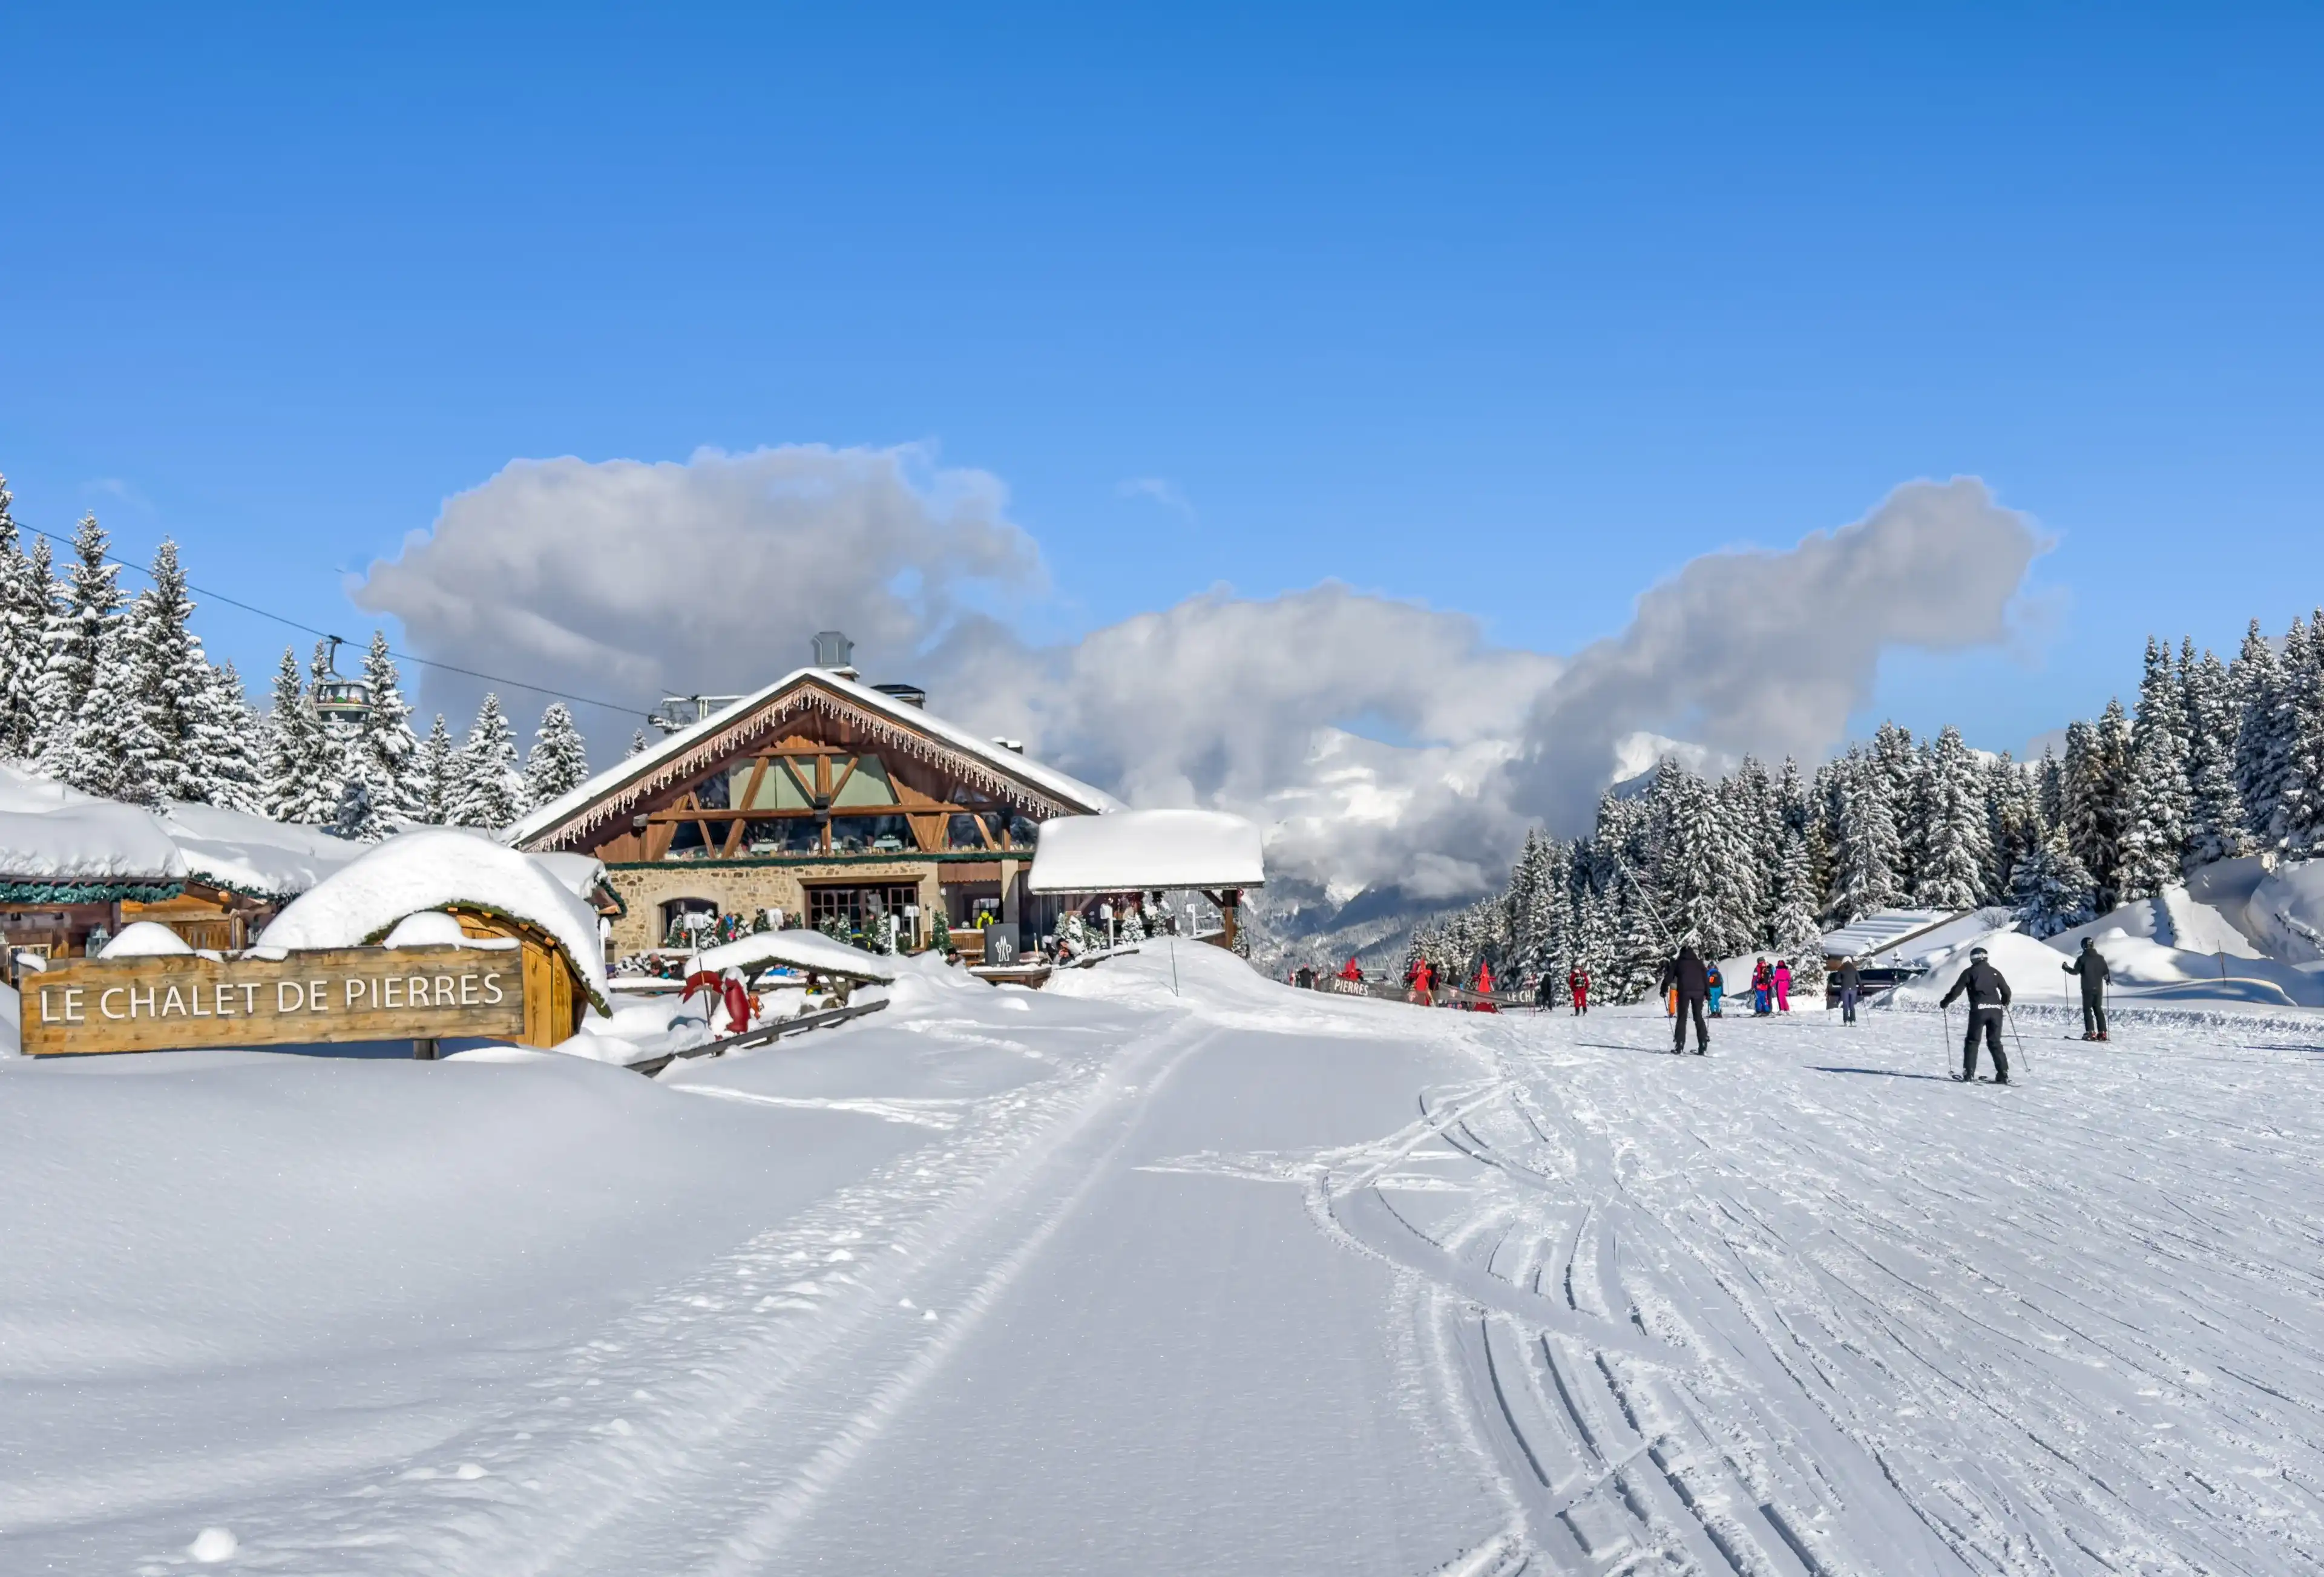 Best Courchevel hotels. Cheap hotels in Courchevel, France